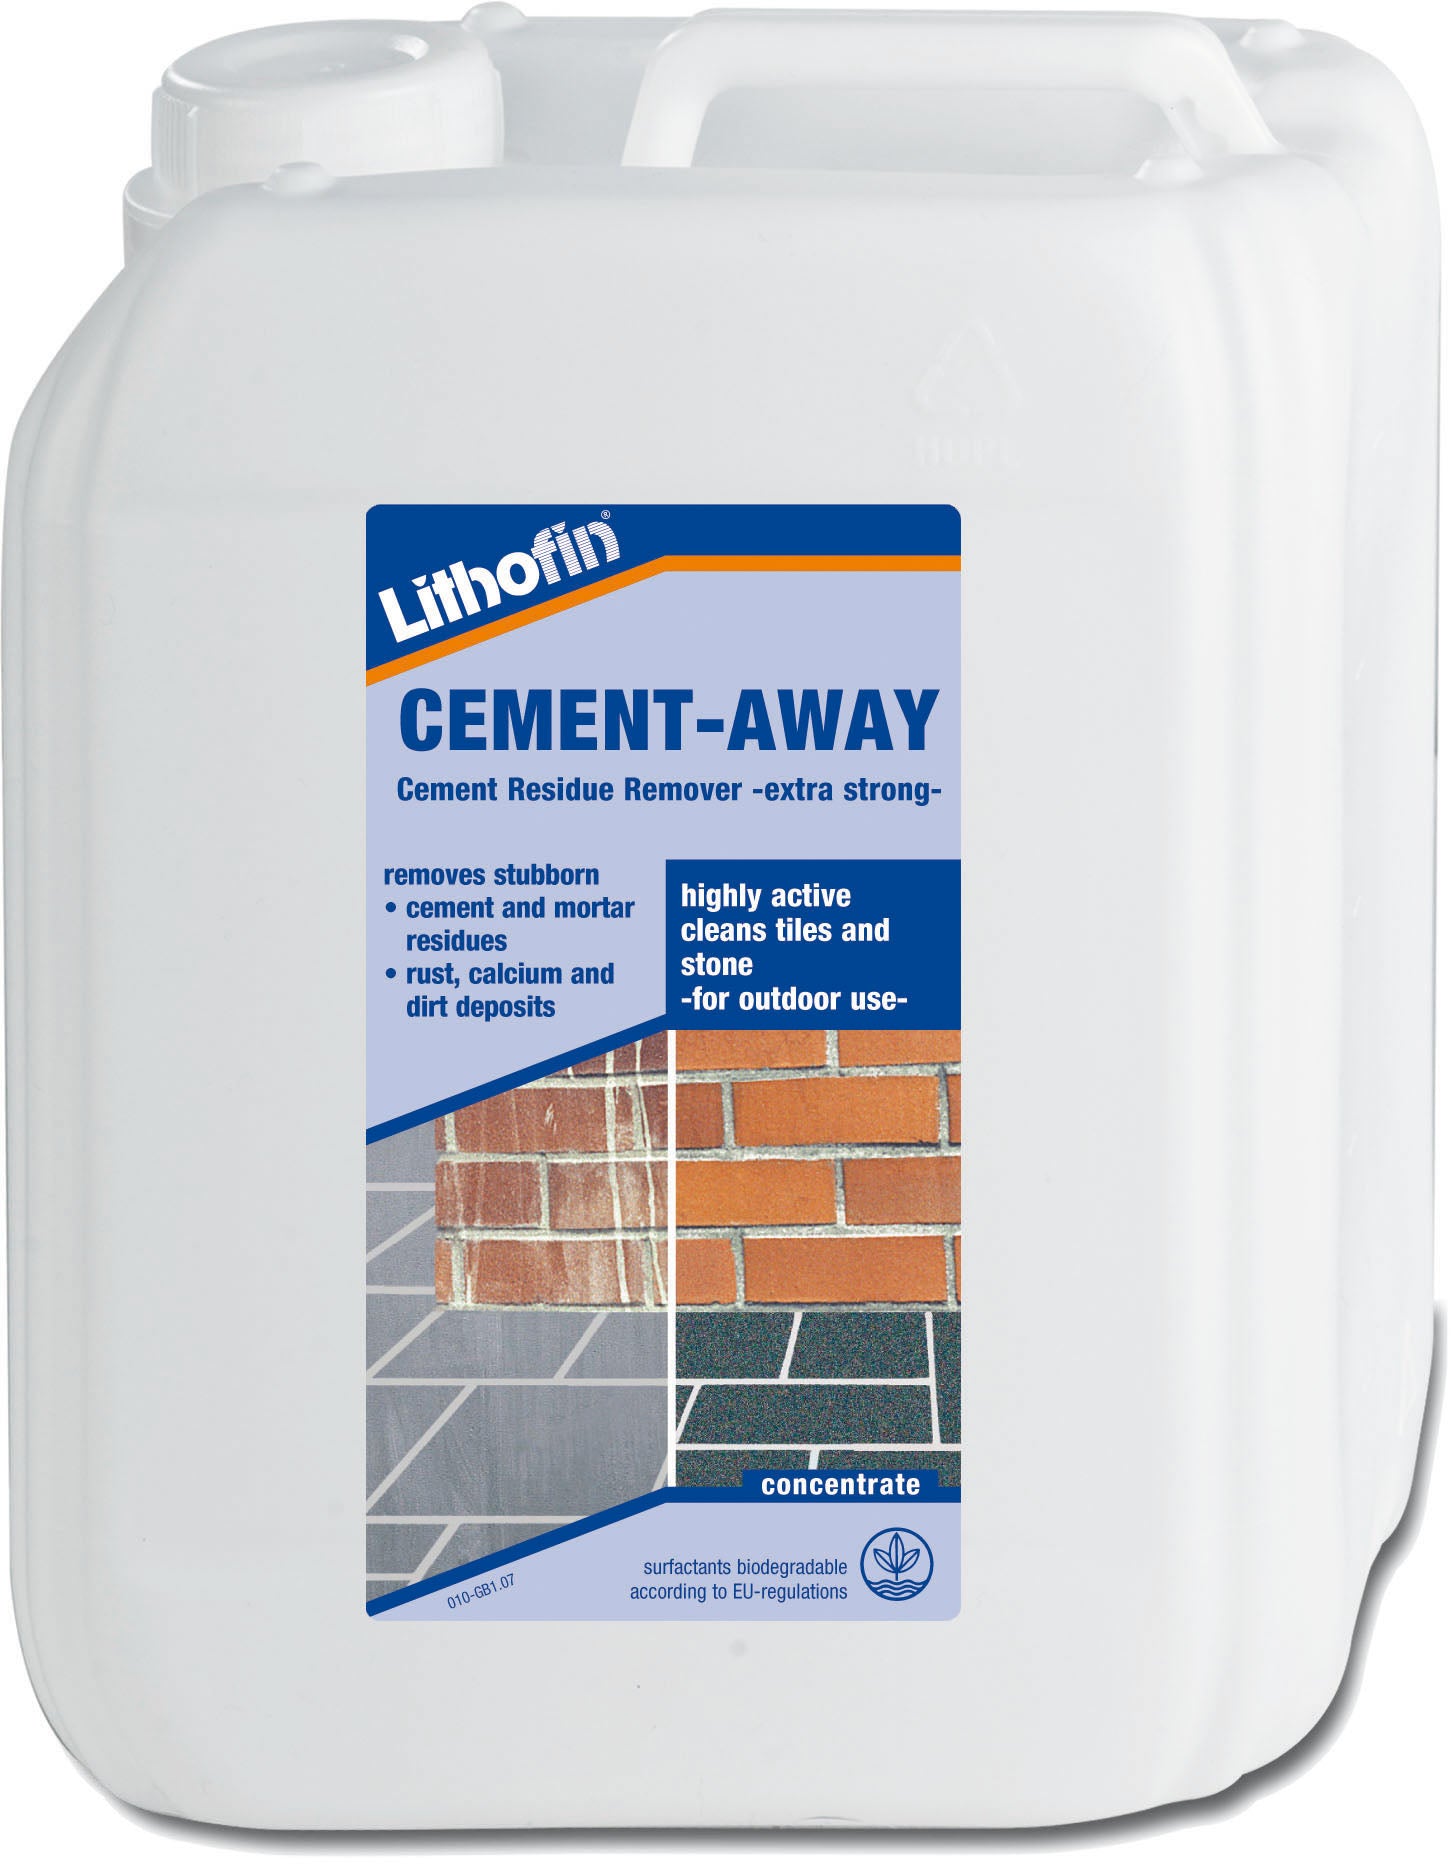 Lithofin cement-away - cement residue remover 